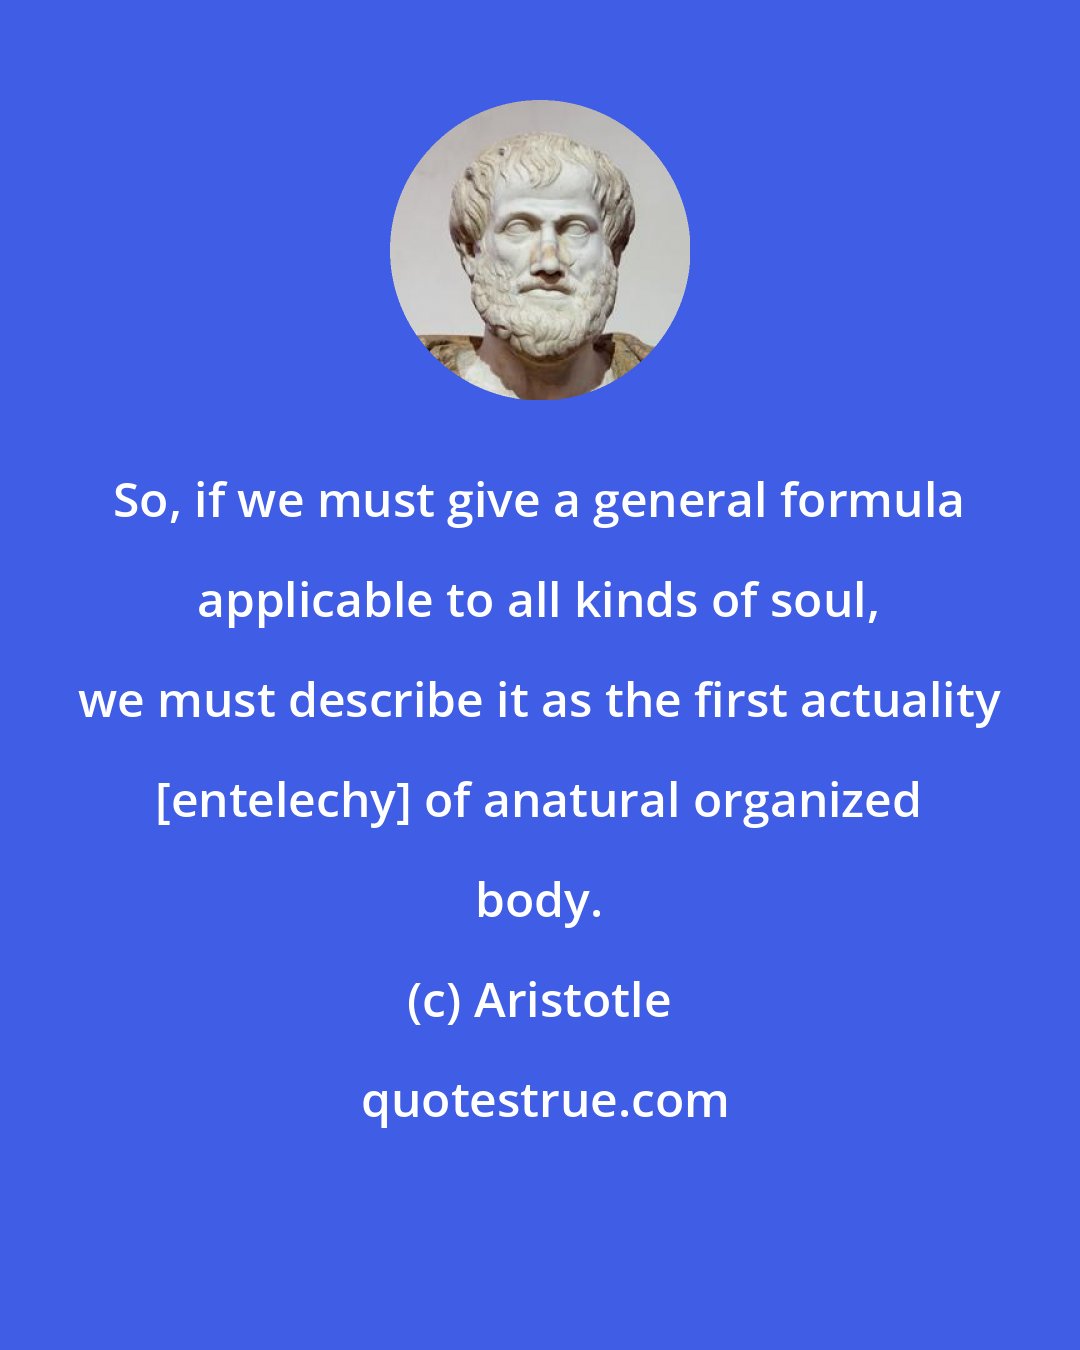 Aristotle: So, if we must give a general formula applicable to all kinds of soul, we must describe it as the first actuality [entelechy] of anatural organized body.